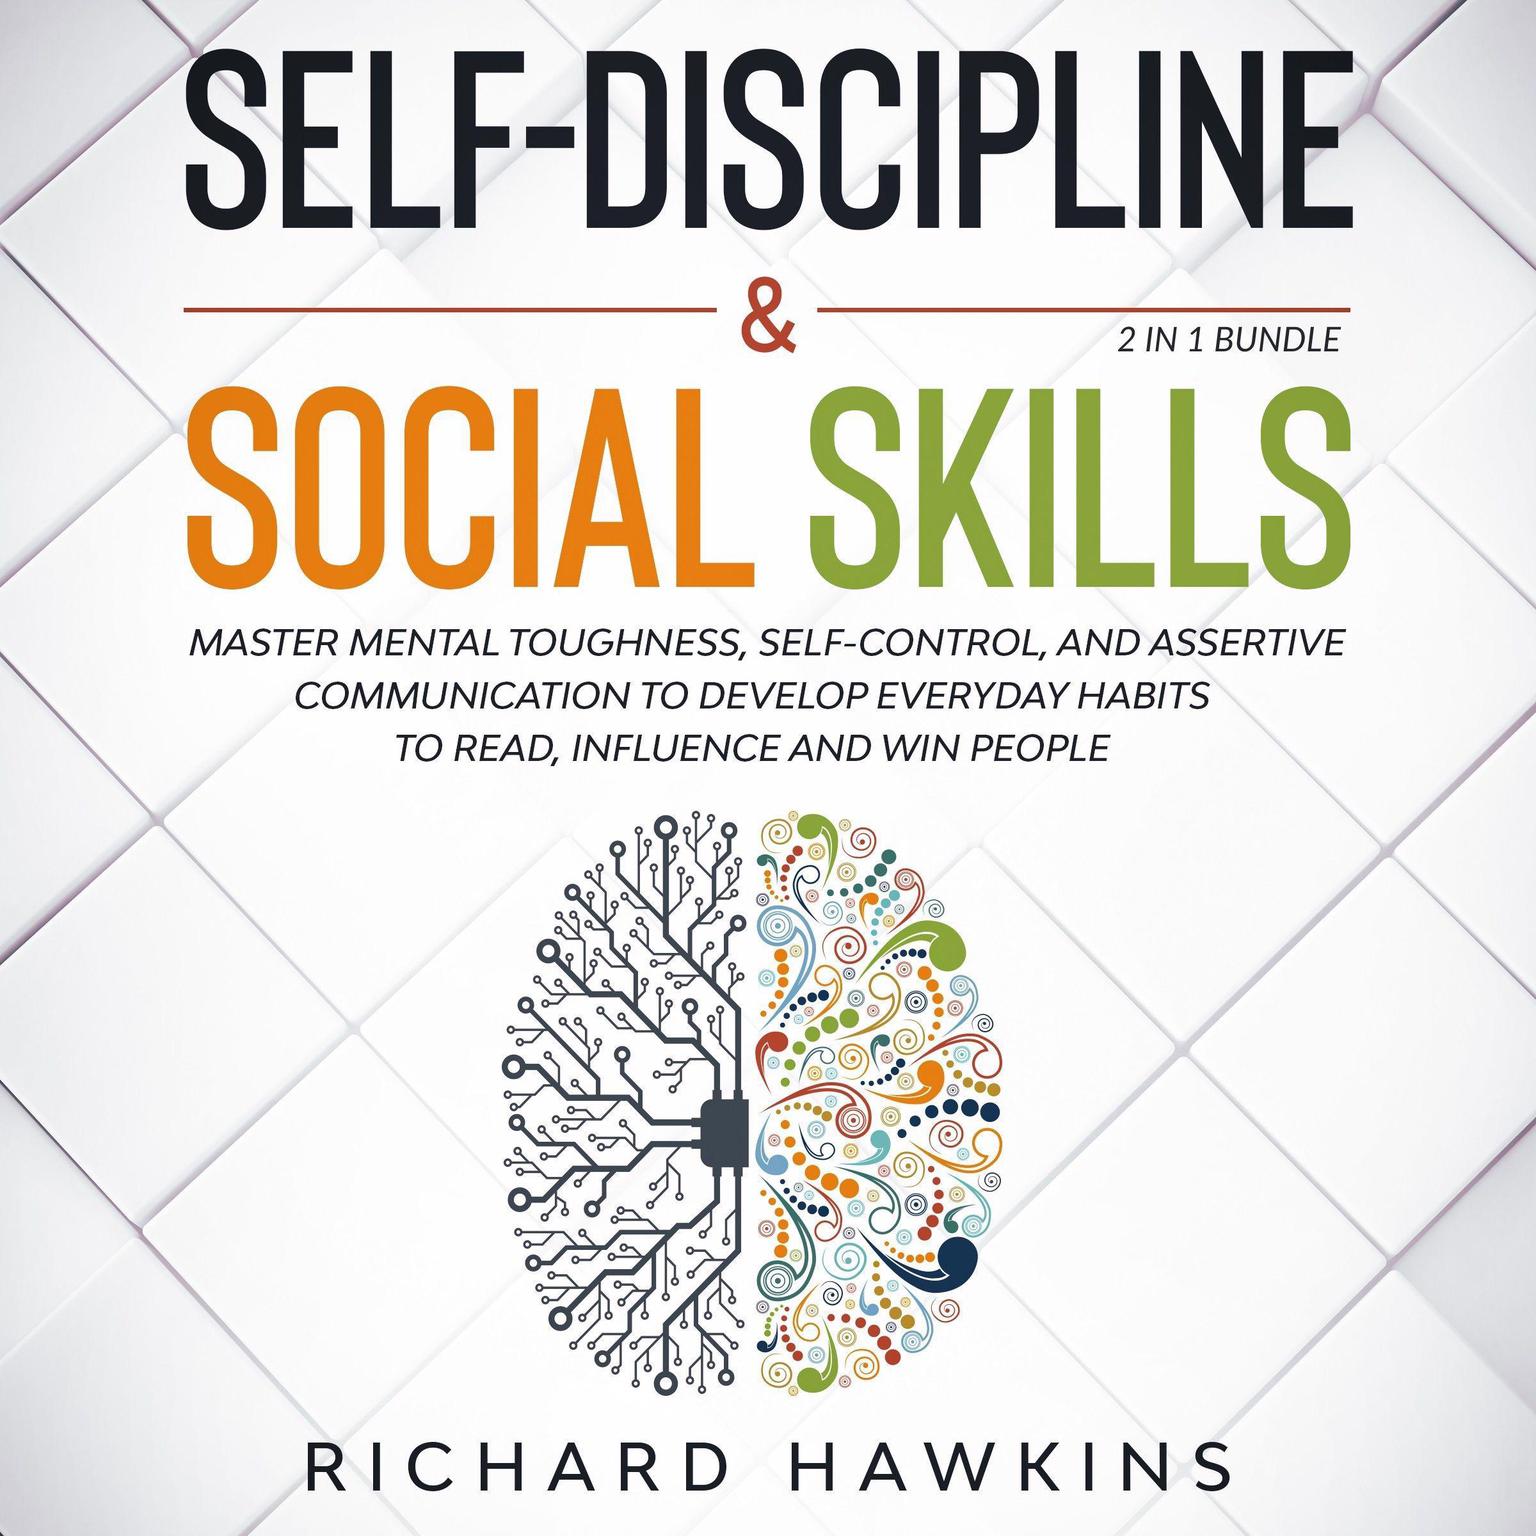 Self-Discipline & Social Skills - 2 in 1 Bundle: Master Mental Toughness, Self-Control, and Assertive Communication to Develop Everyday Habits to Read, Influence and Win People Audiobook, by Richard Hawkins